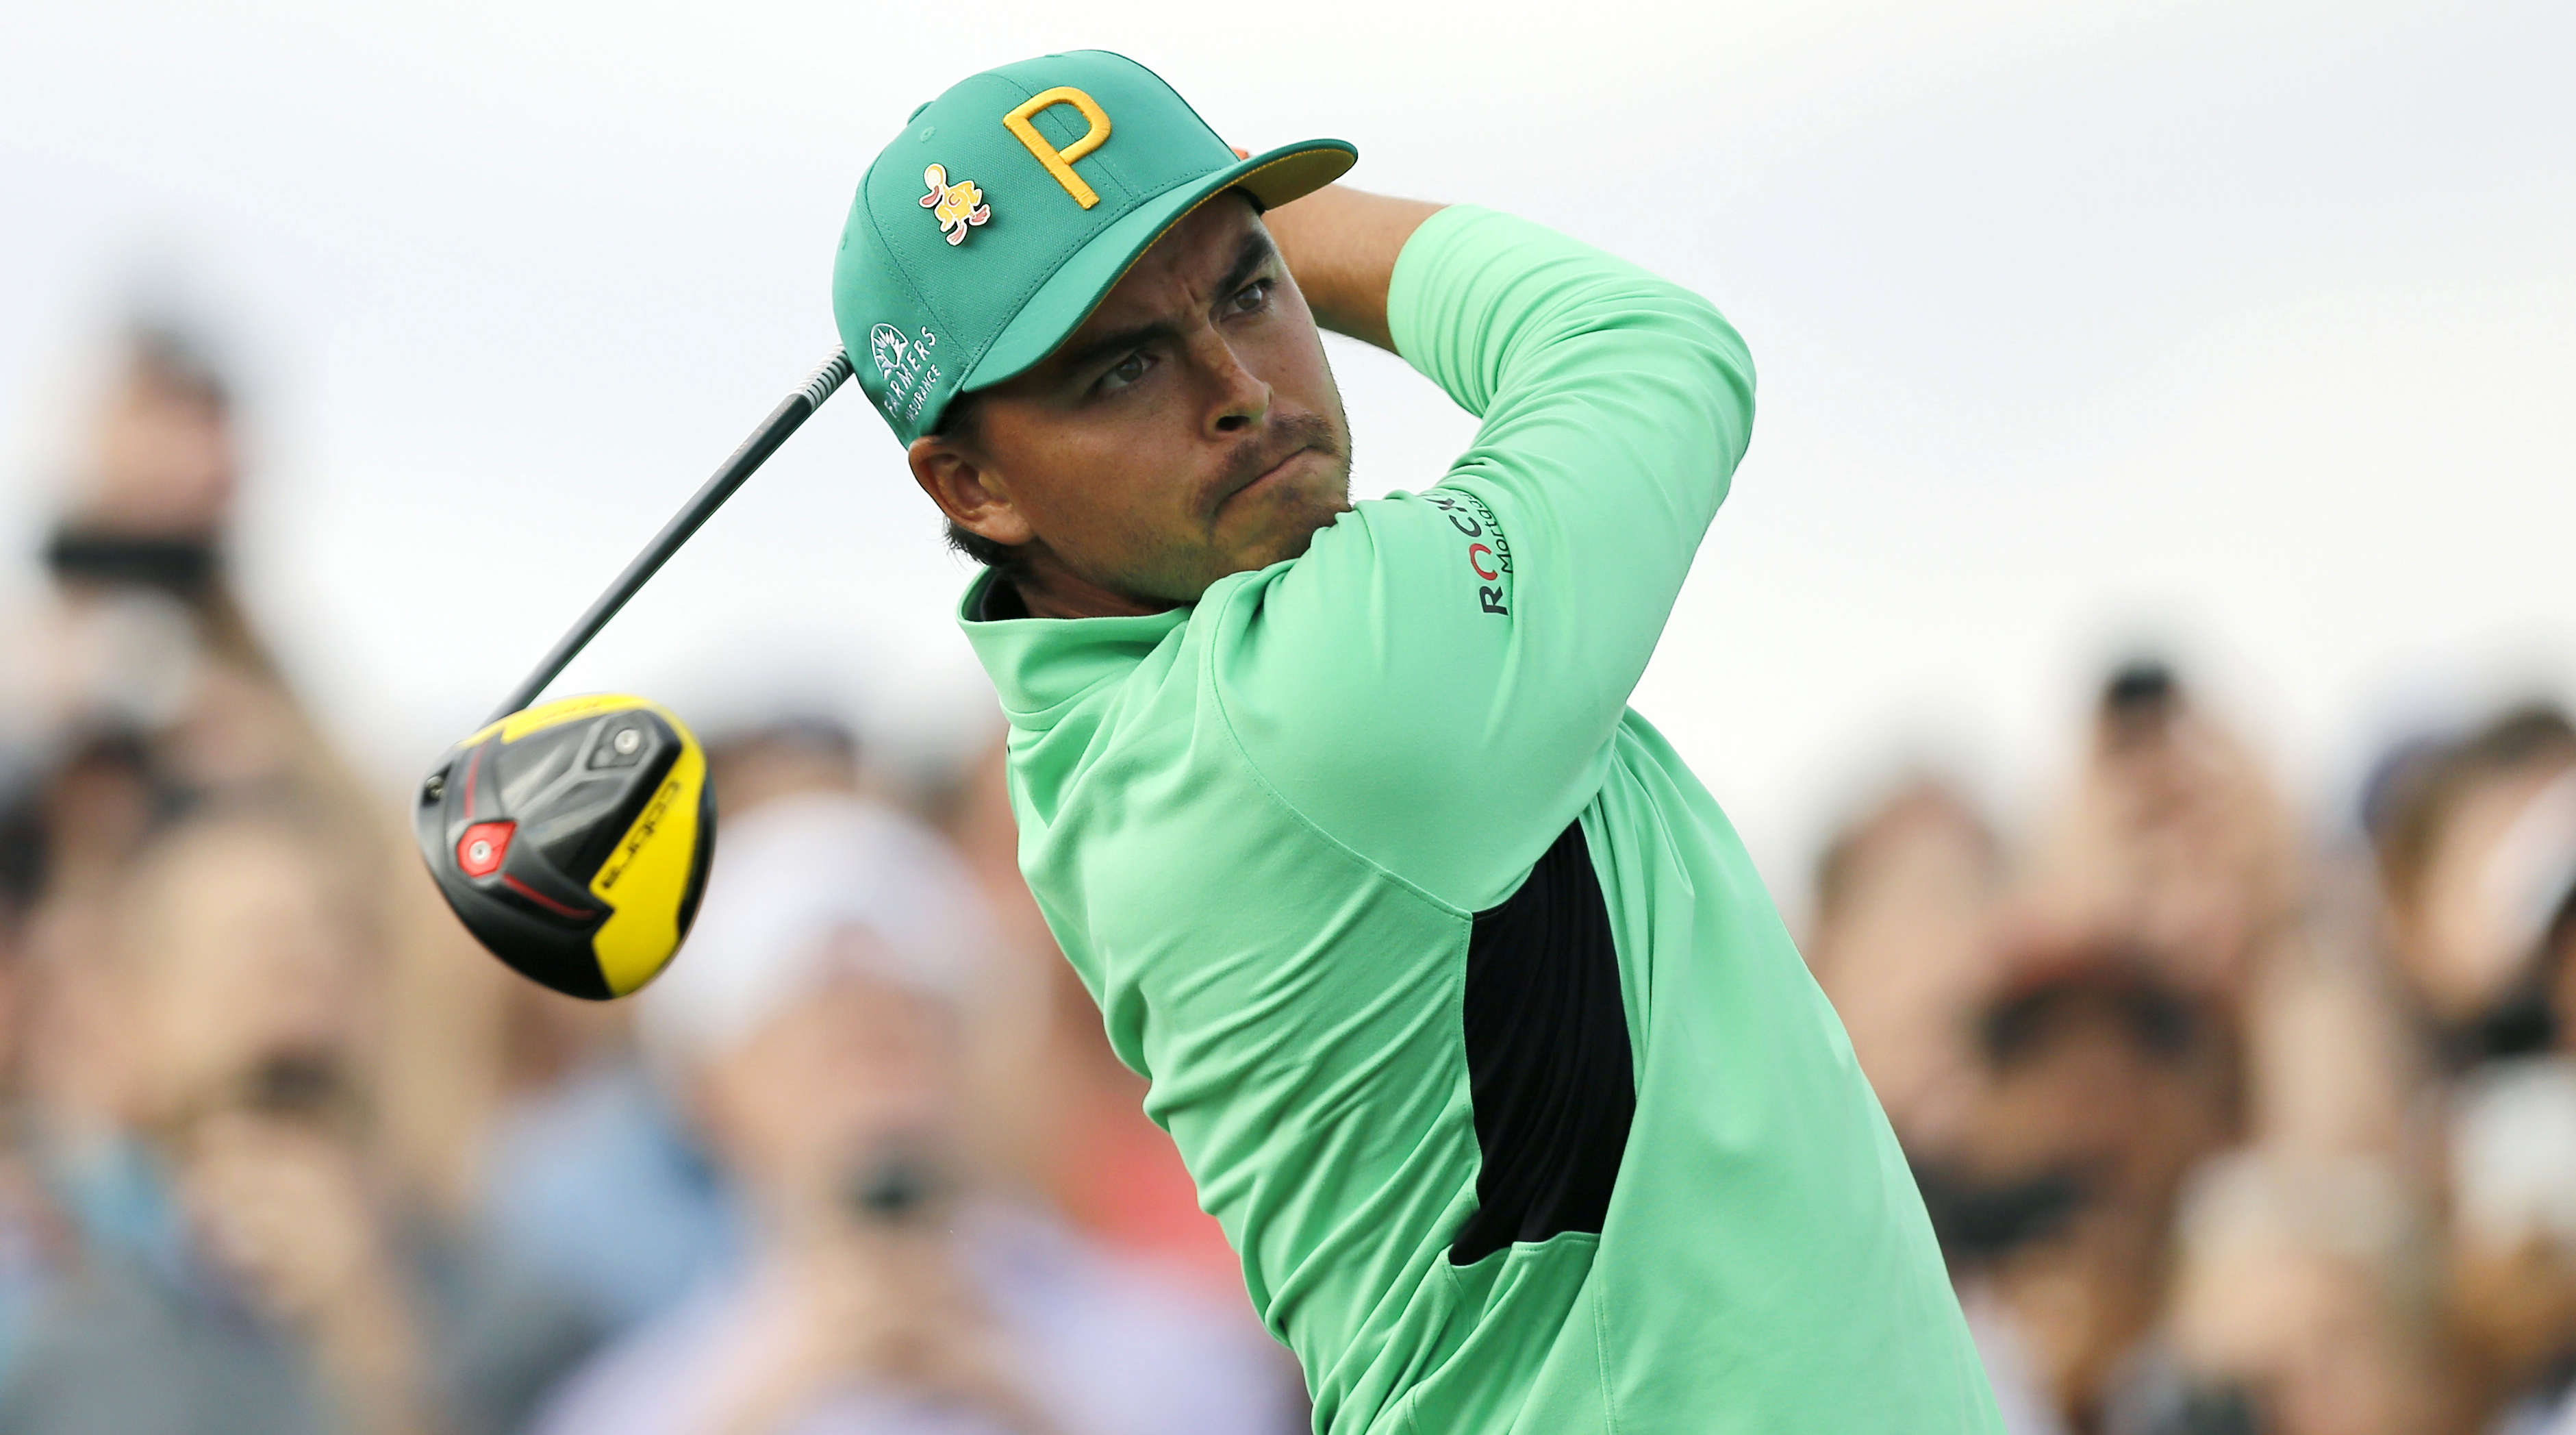 Phoenix Open leaderboard Rickie Fowler takes 4shot lead into Sunday